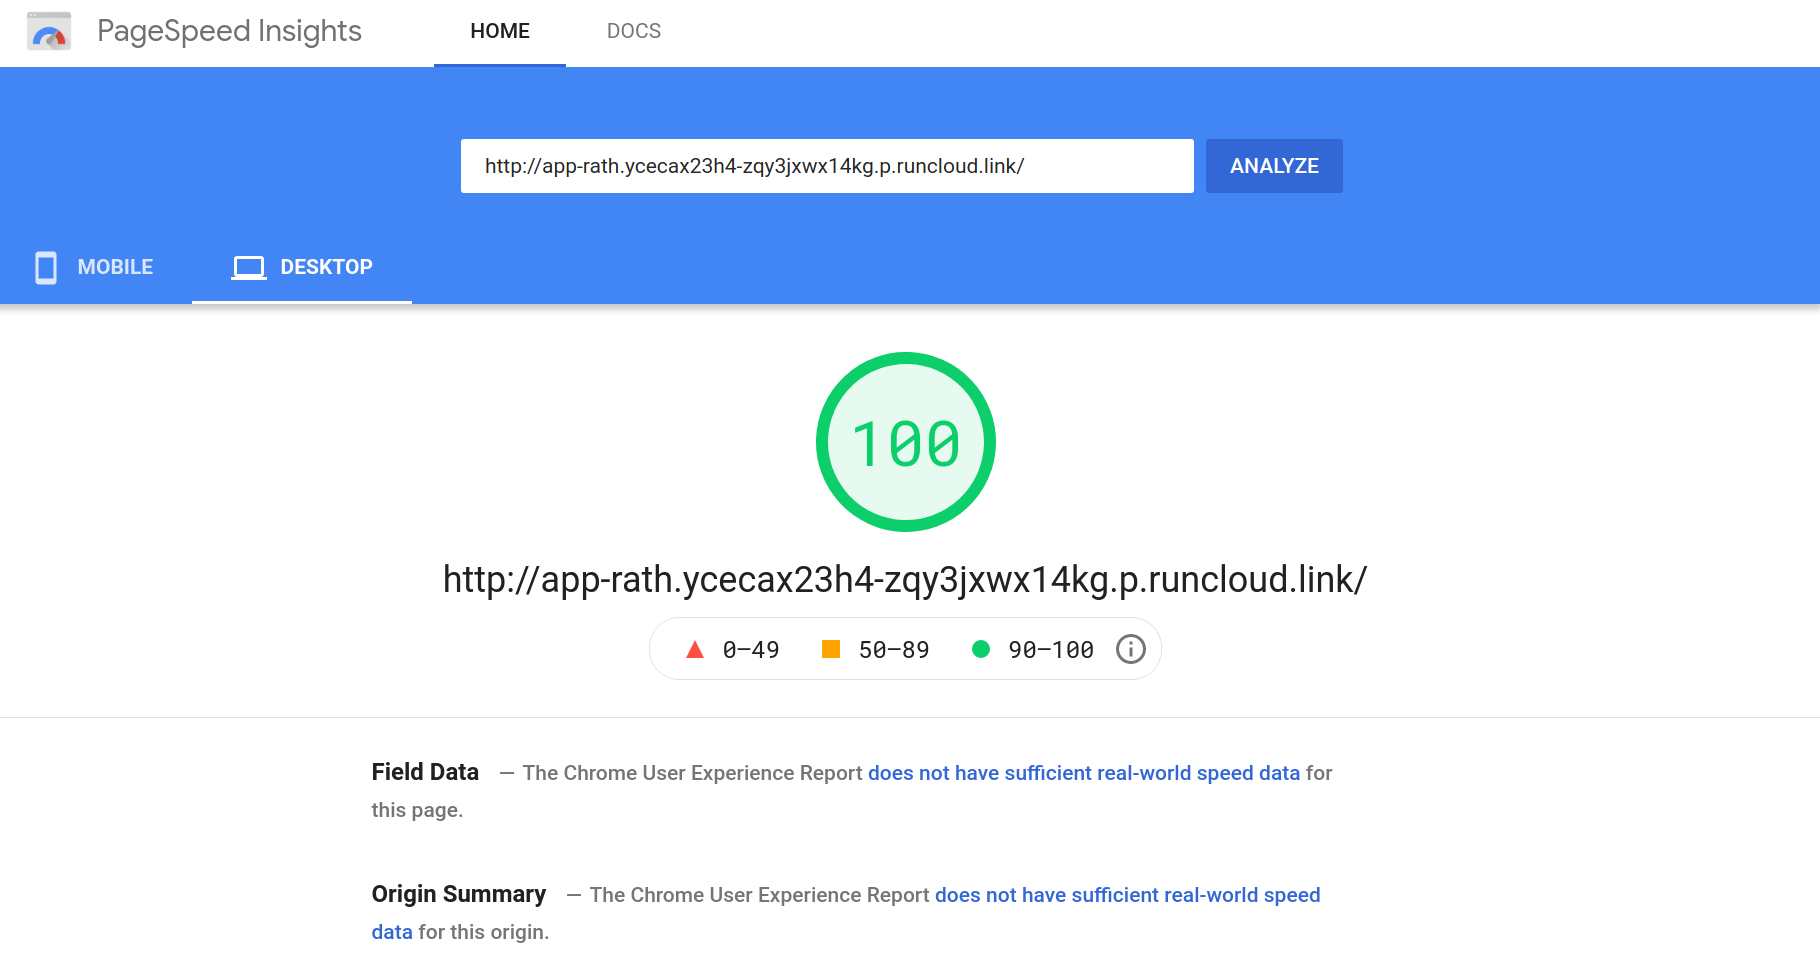 Google PageSpeed Insights result of a fresh WordPress site